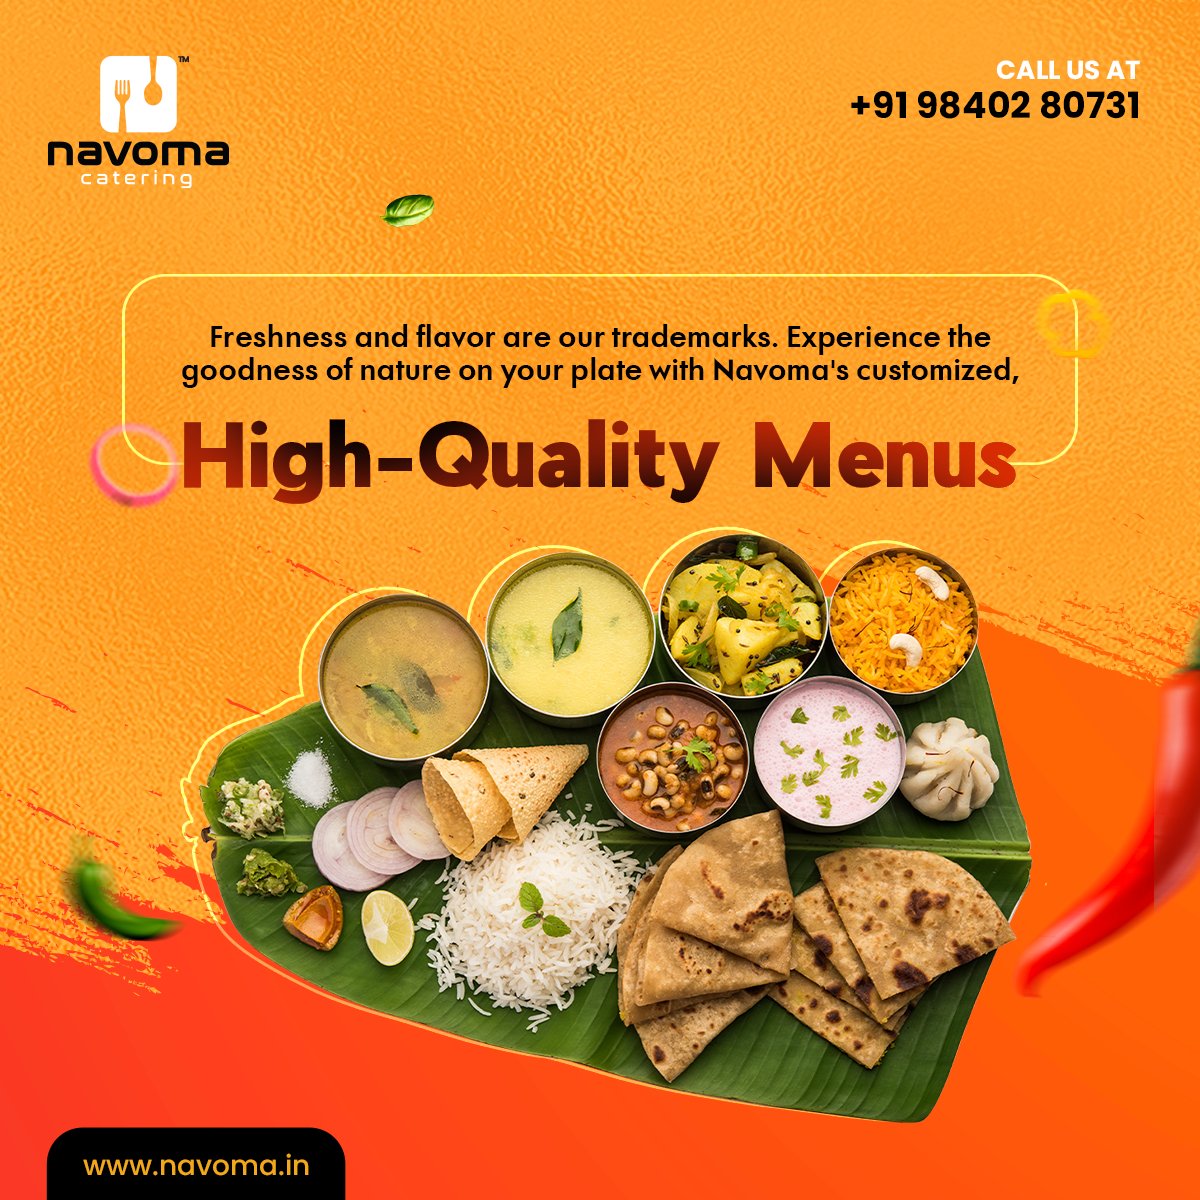 At Navoma Catering, freshness and flavor are not just trademarks; they're the essence of every dish.

Reach out to us at +91 98402 80731 for inquiries or visit navoma.in.

#NavomaCatering #CulinaryMagic #ExquisiteFlavors #QualityCuisine #UnmatchedTaste